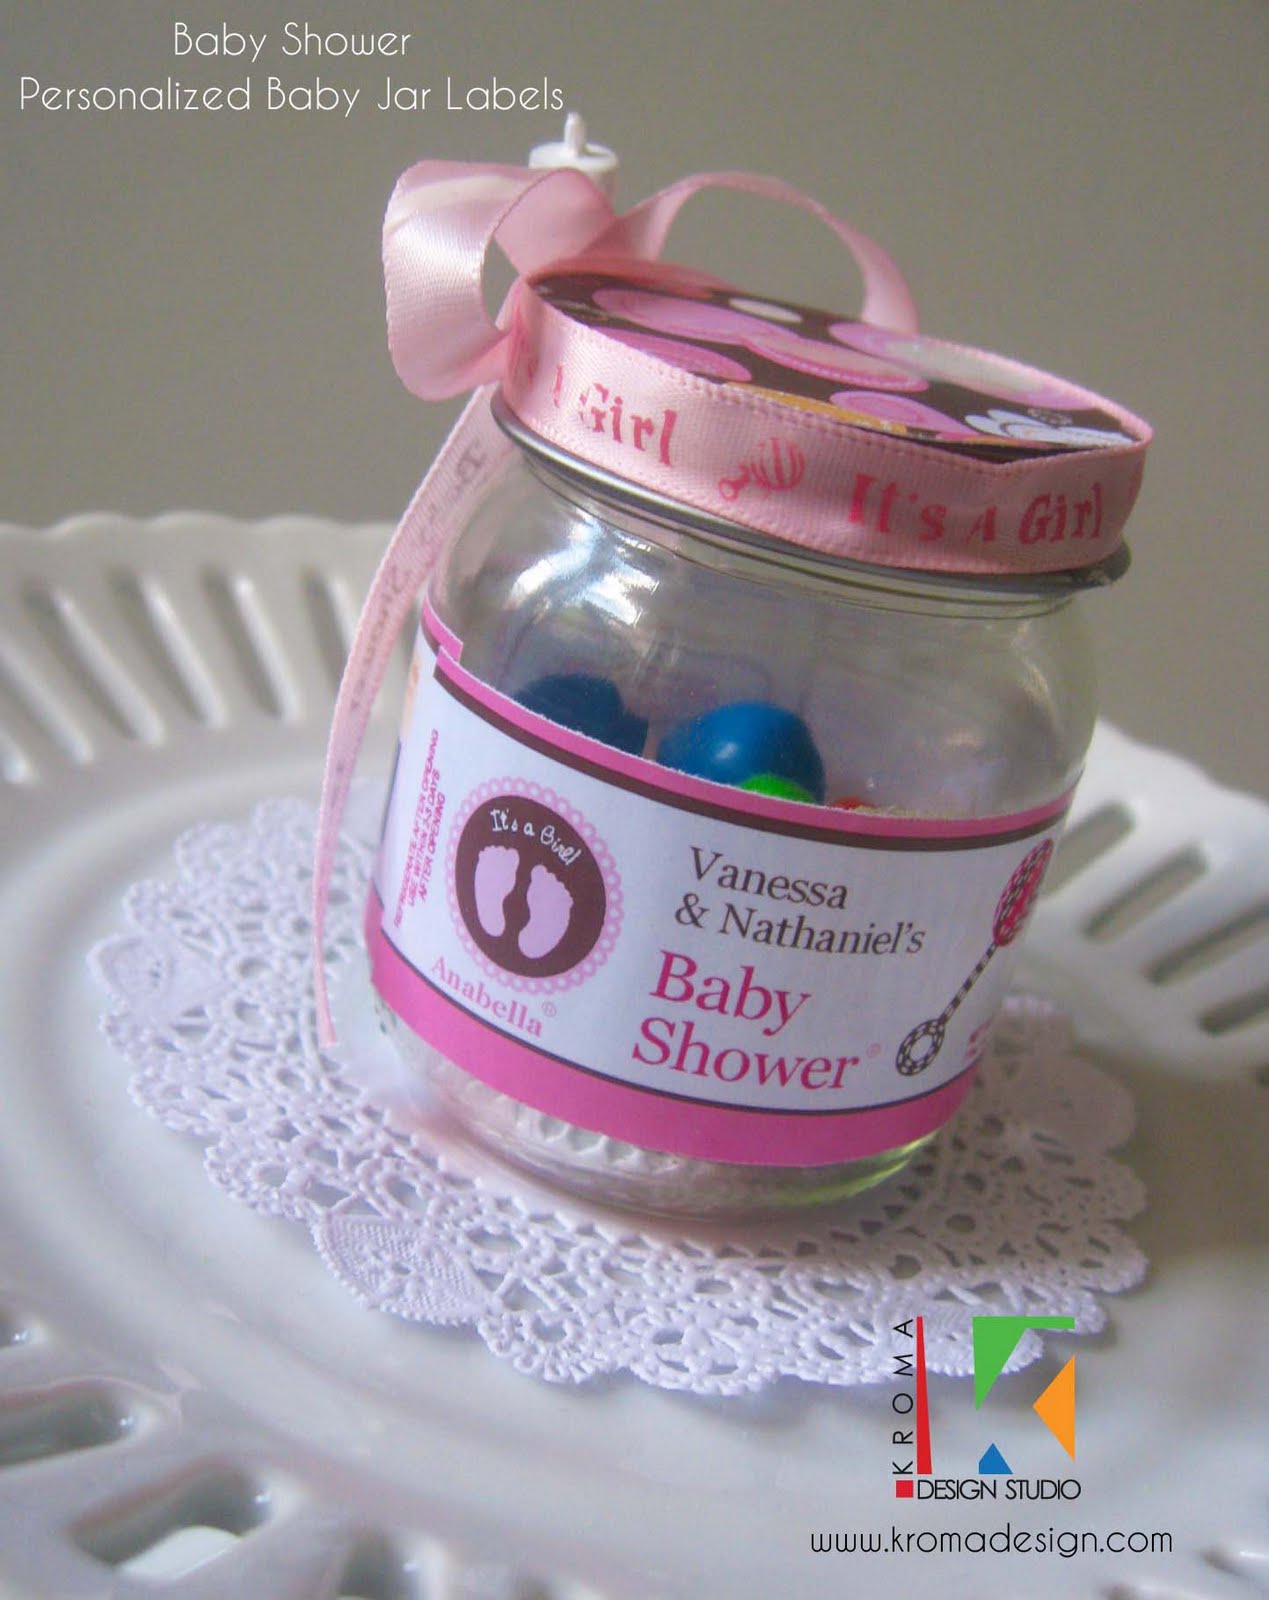 Kroma Design Studio Today S Party Ideas Baby Showers Diy Printable Baby Jar Label Favors For Baby Showers